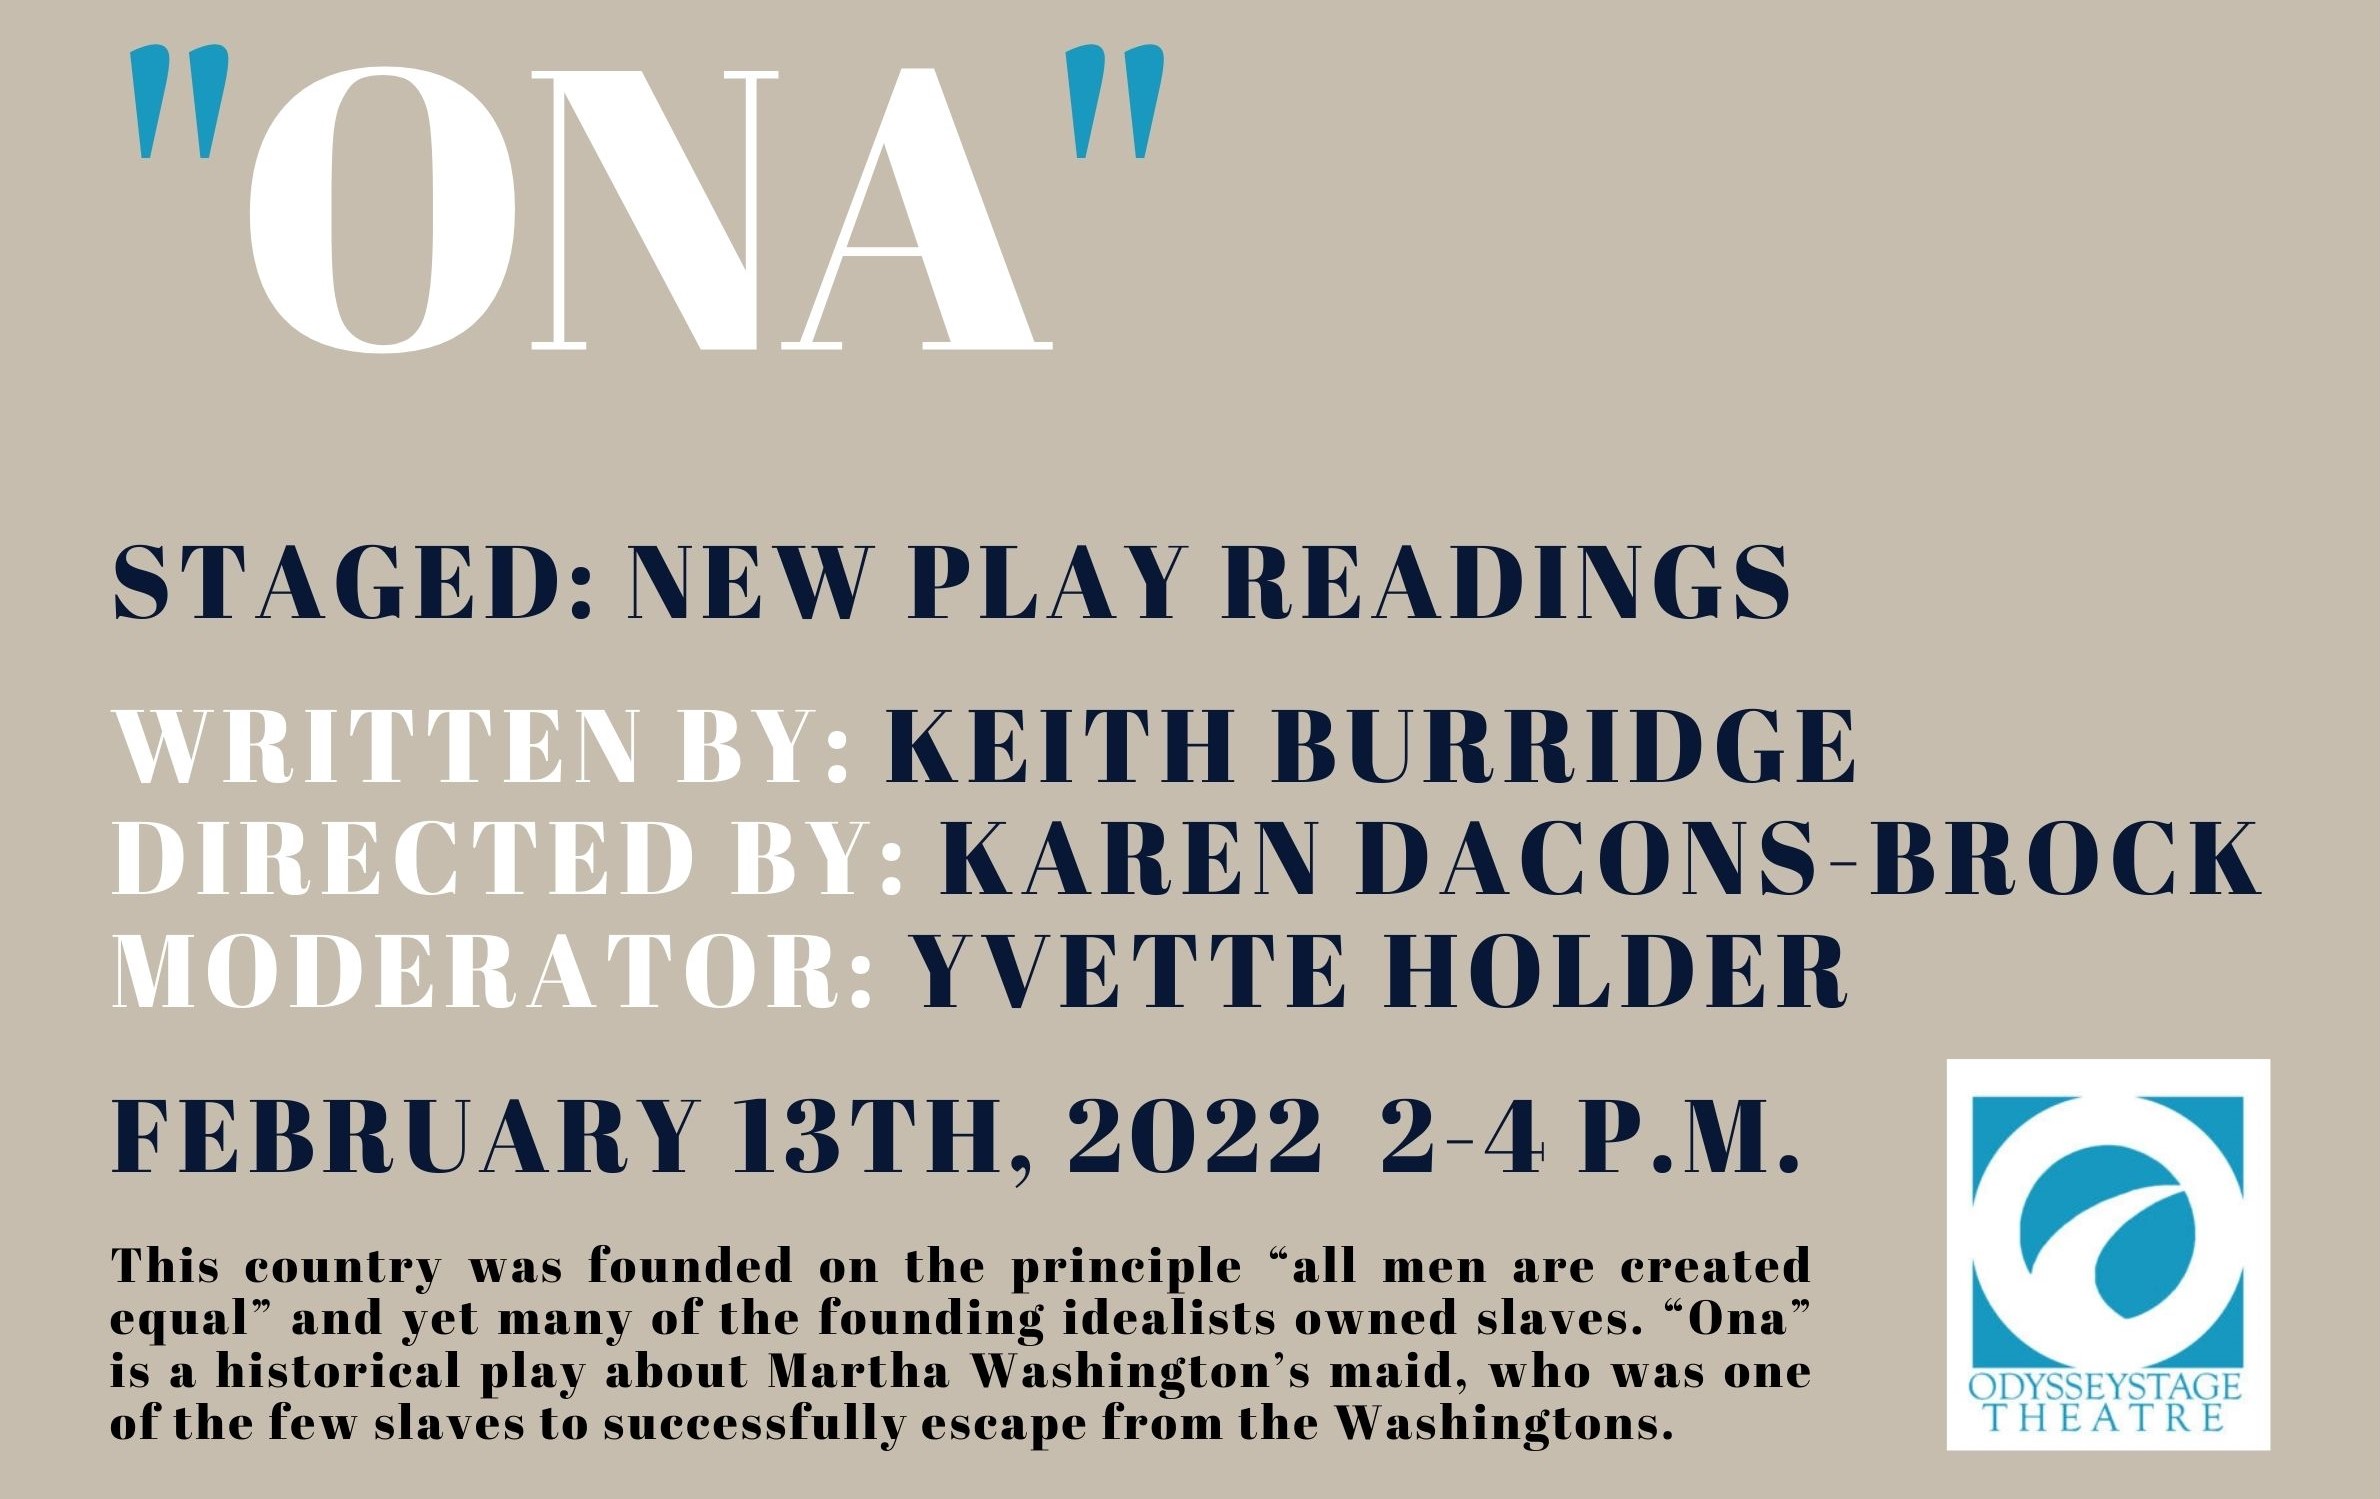 Staged: New Play Readings presents Ona by Keith Burridge